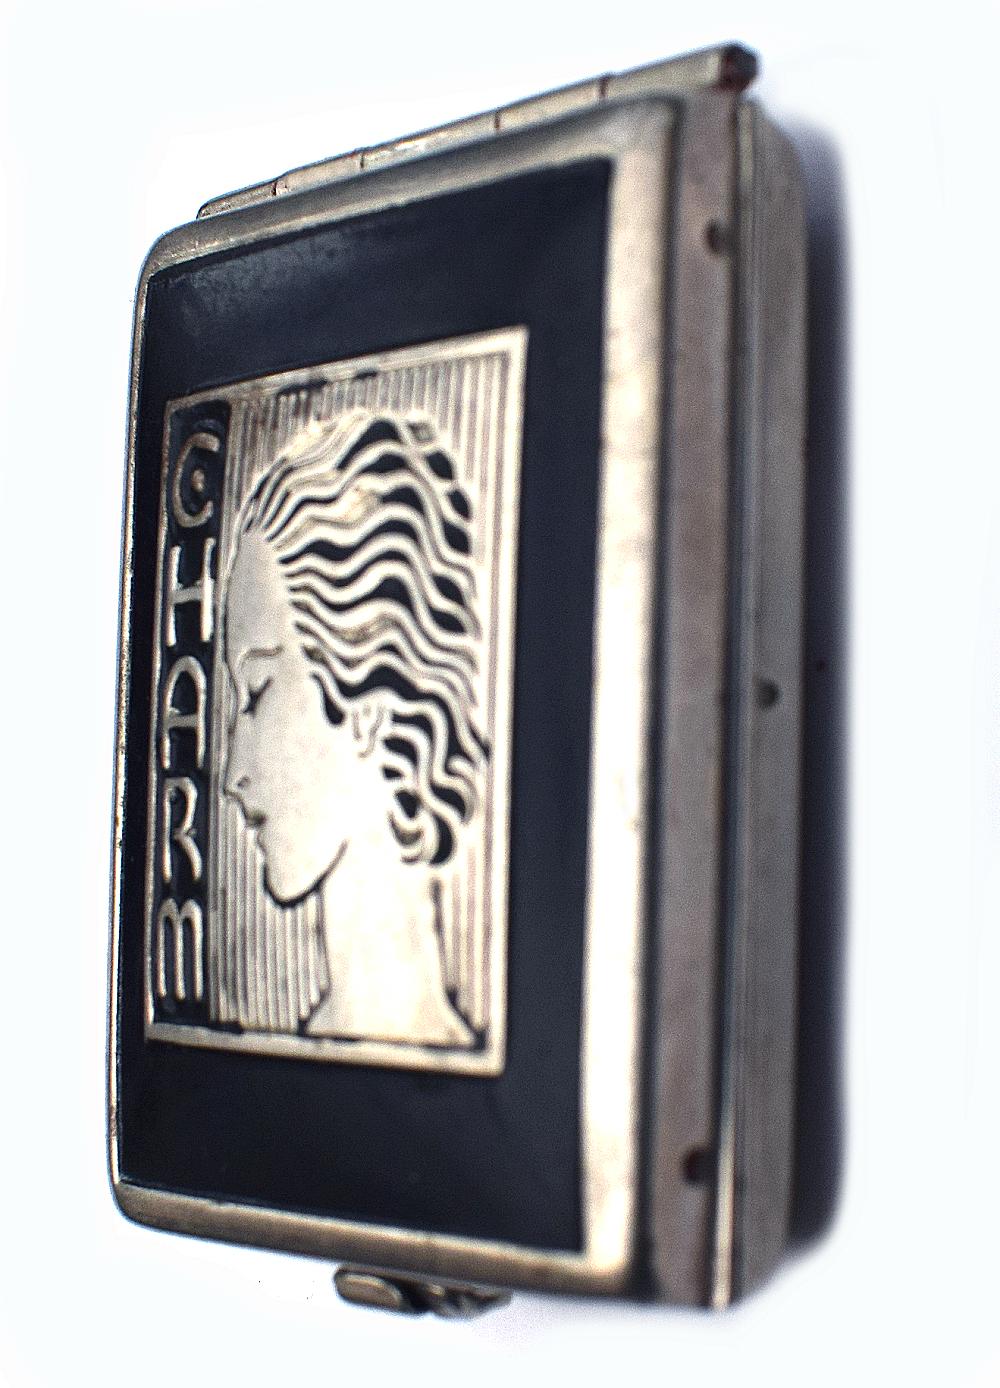 Art Deco 1930s Ladies Rouge Compact Called 'Charm' 3